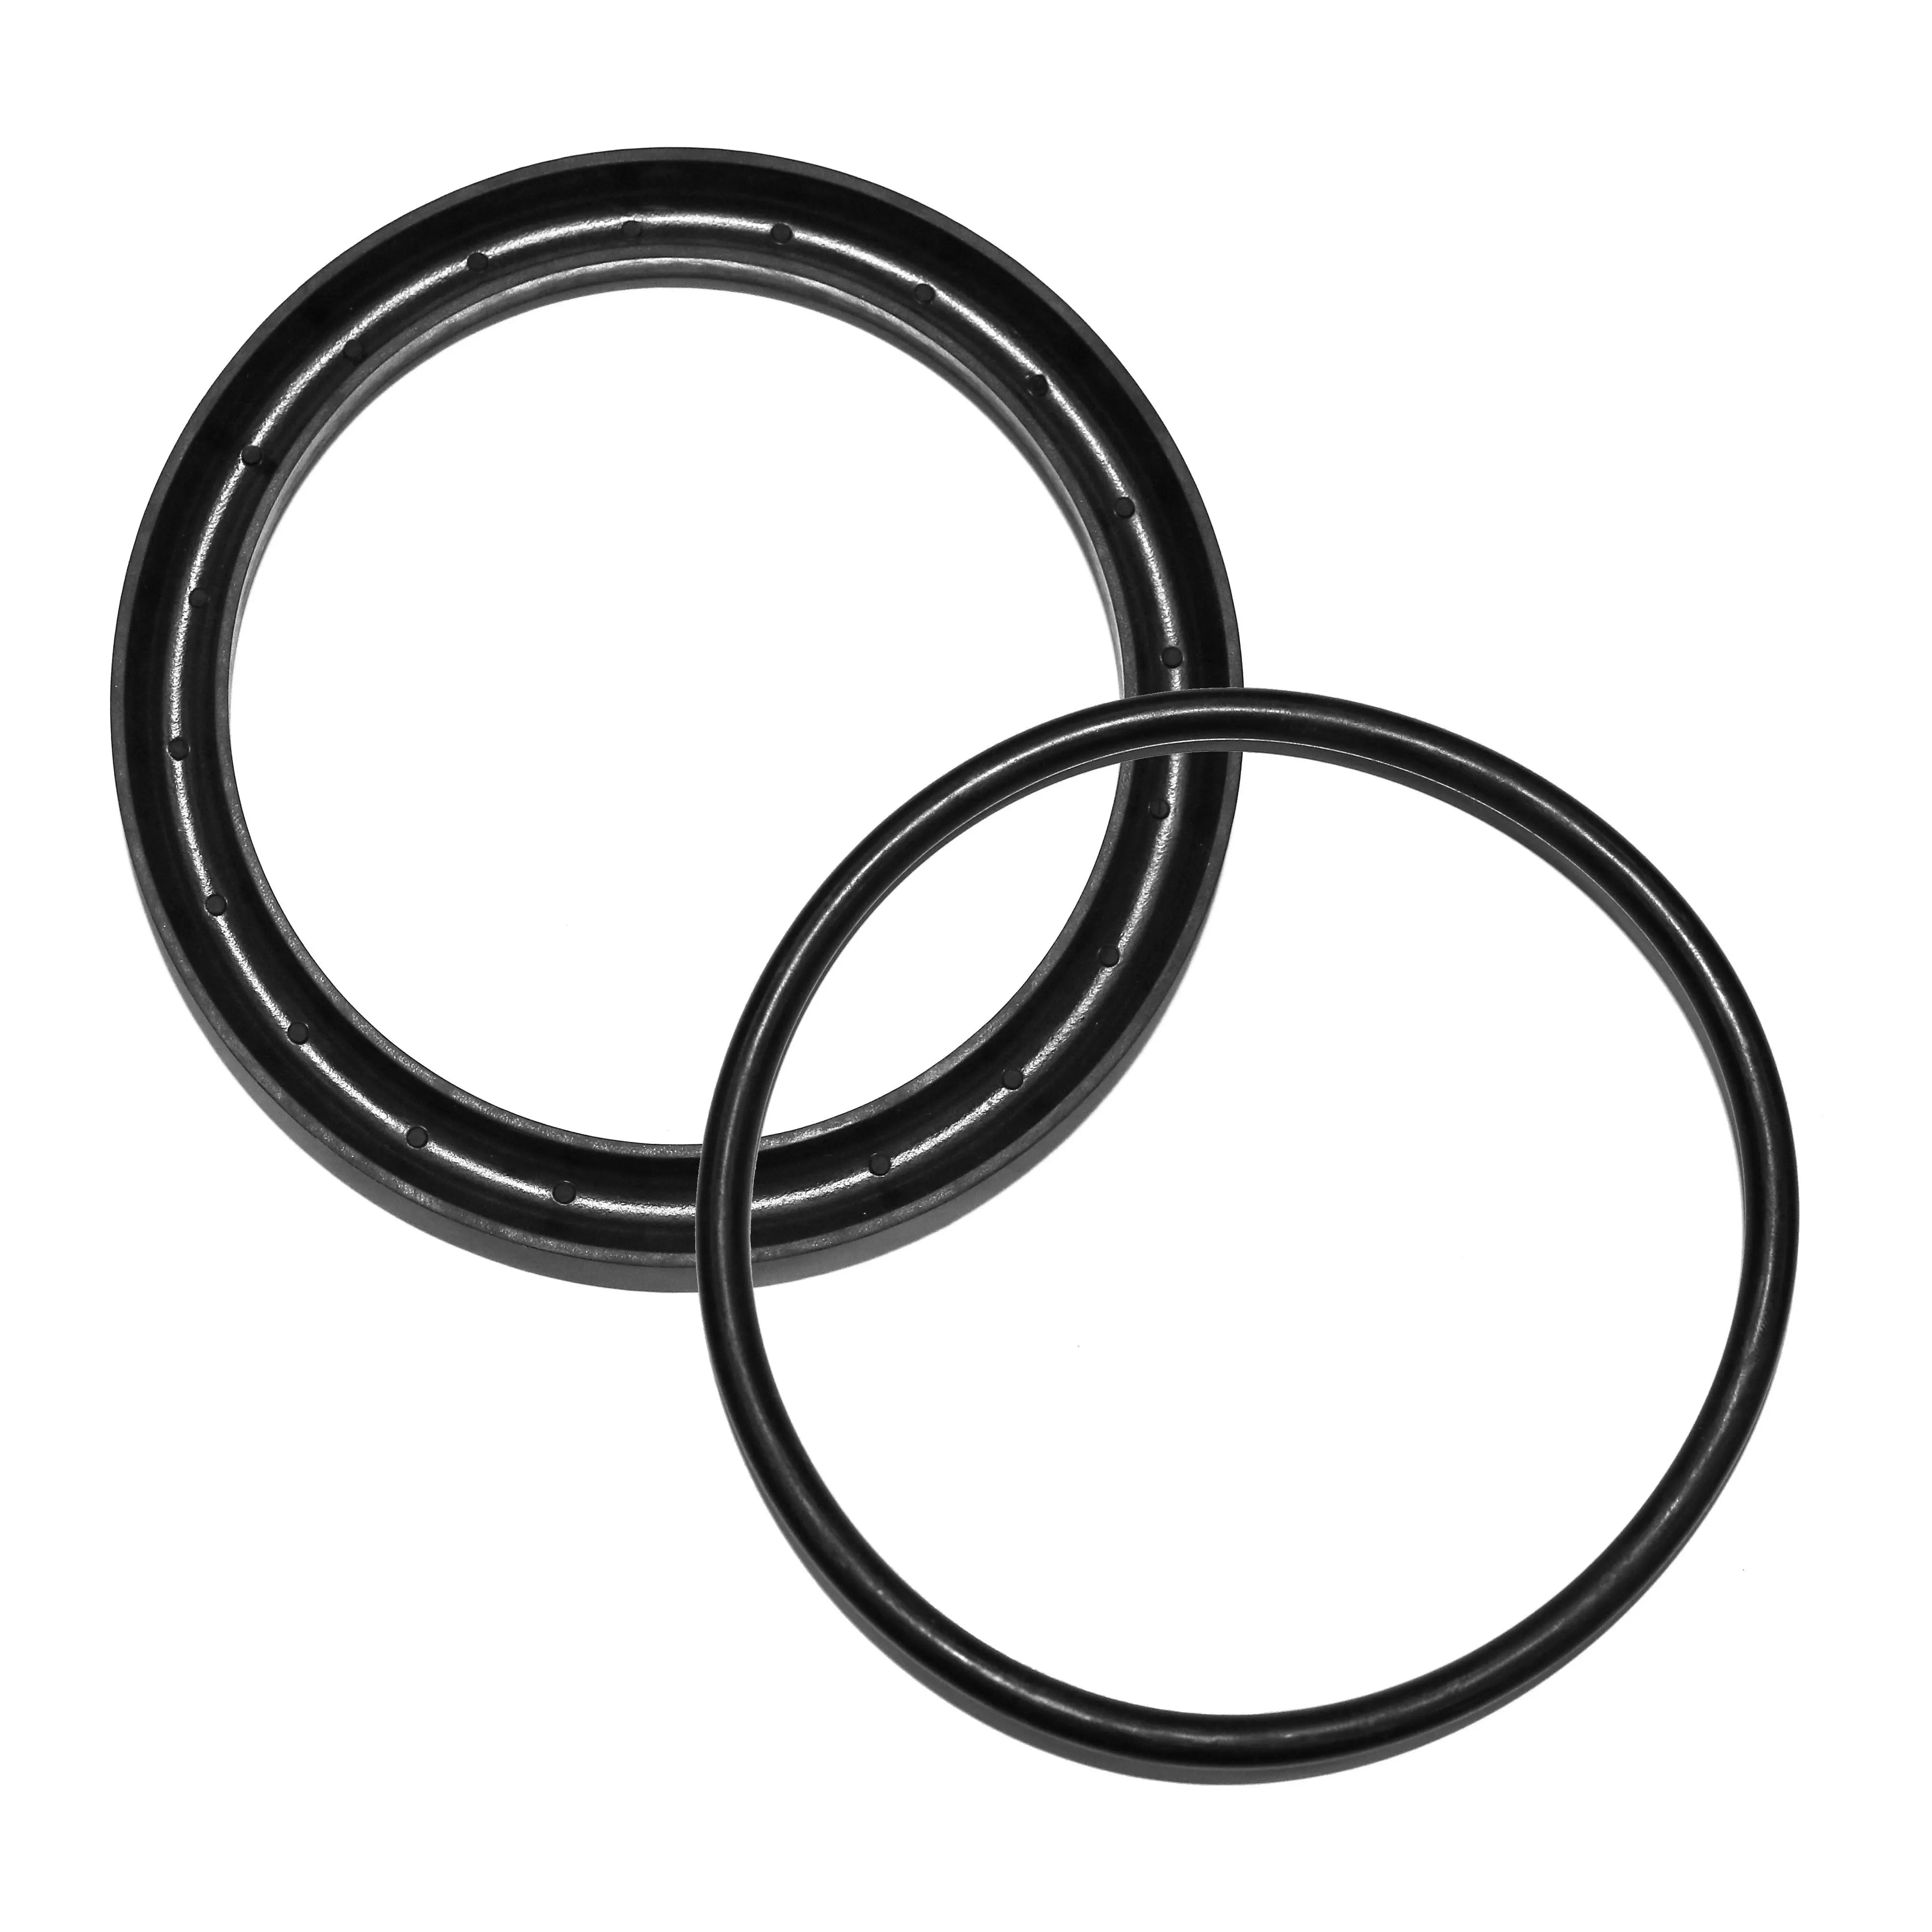 Which Seal Should I Use? Gasket vs Oring